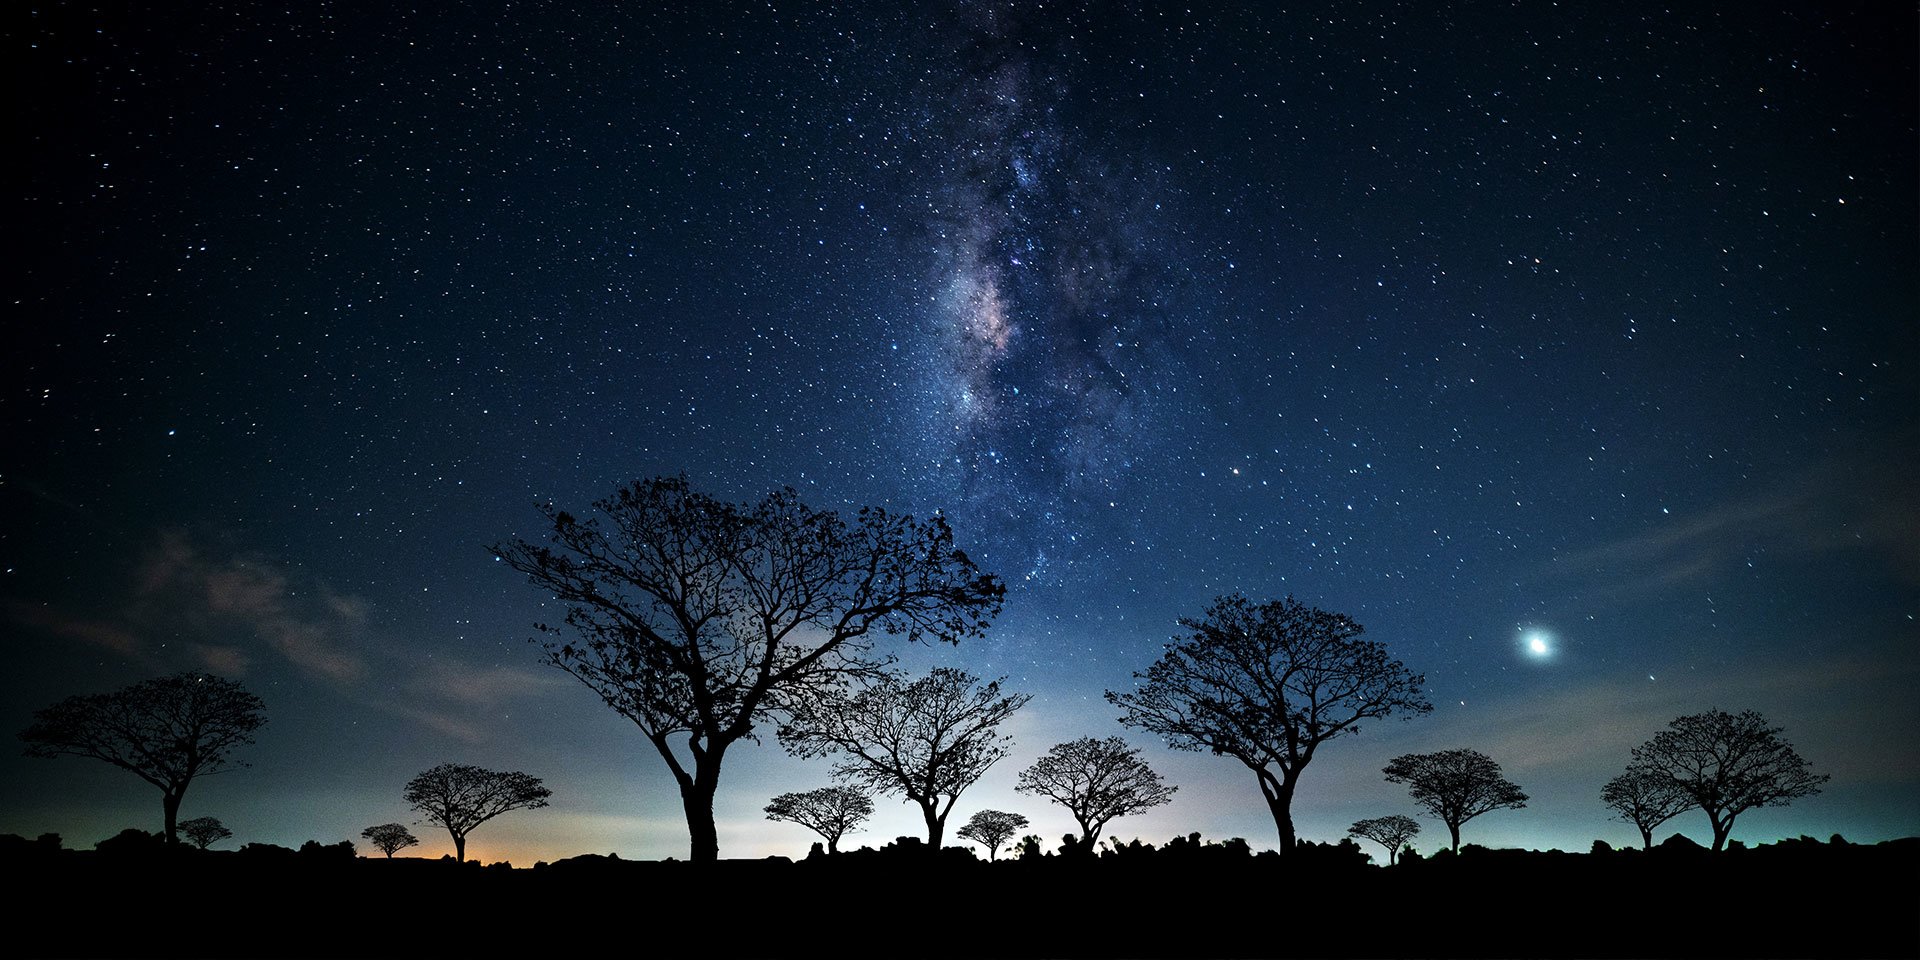 See the night sky with a clarify like never before on your african safari